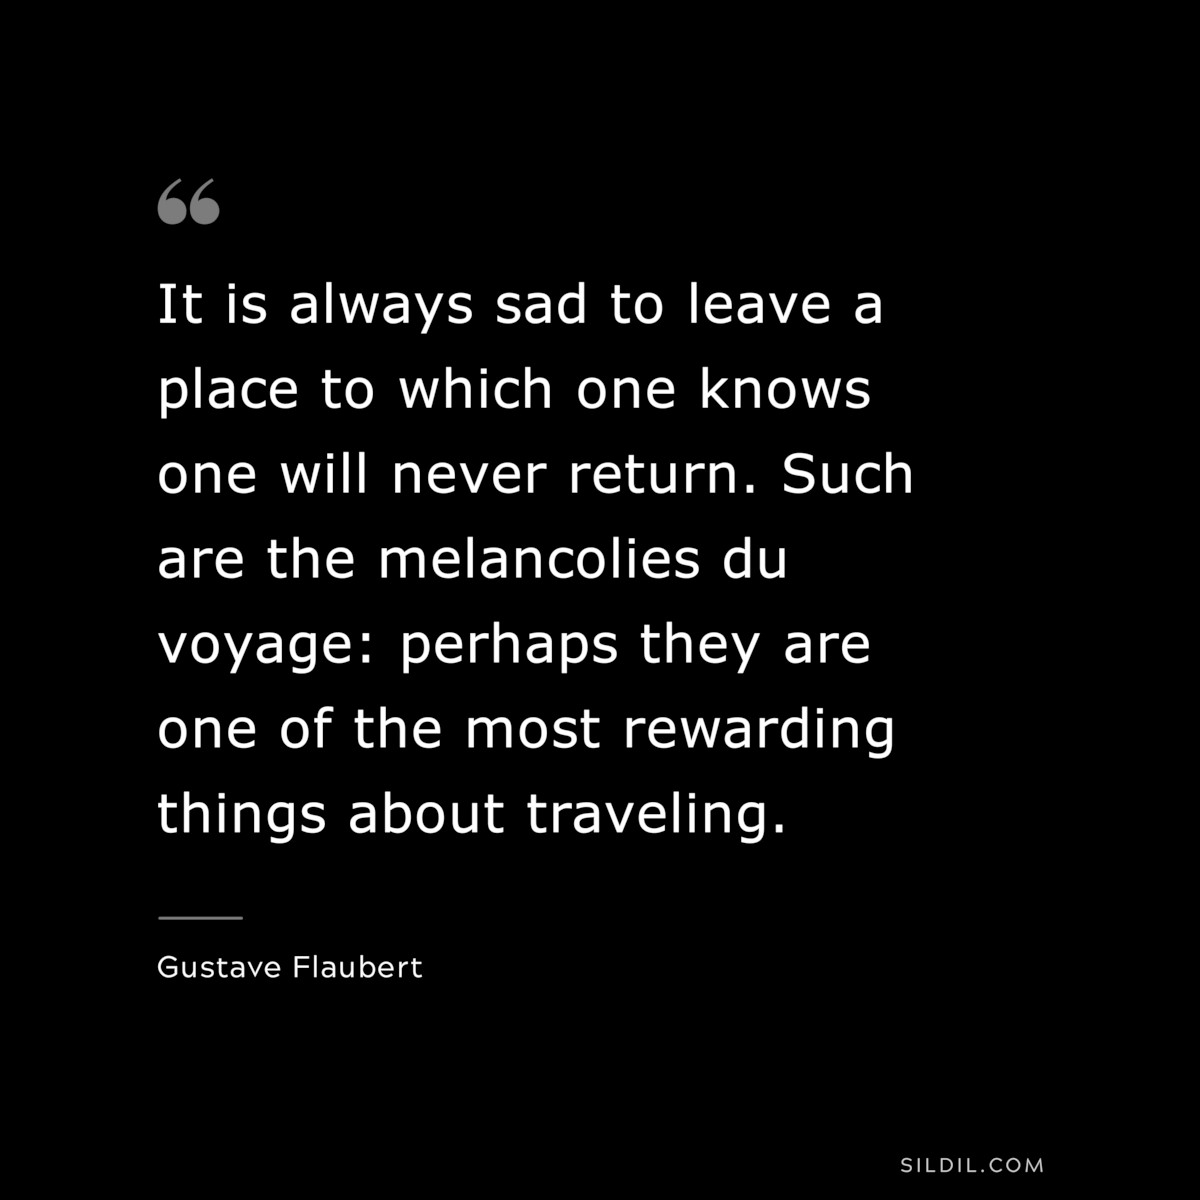 It is always sad to leave a place to which one knows one will never return. Such are the melancolies du voyage: perhaps they are one of the most rewarding things about traveling. ― Gustave Flaubert